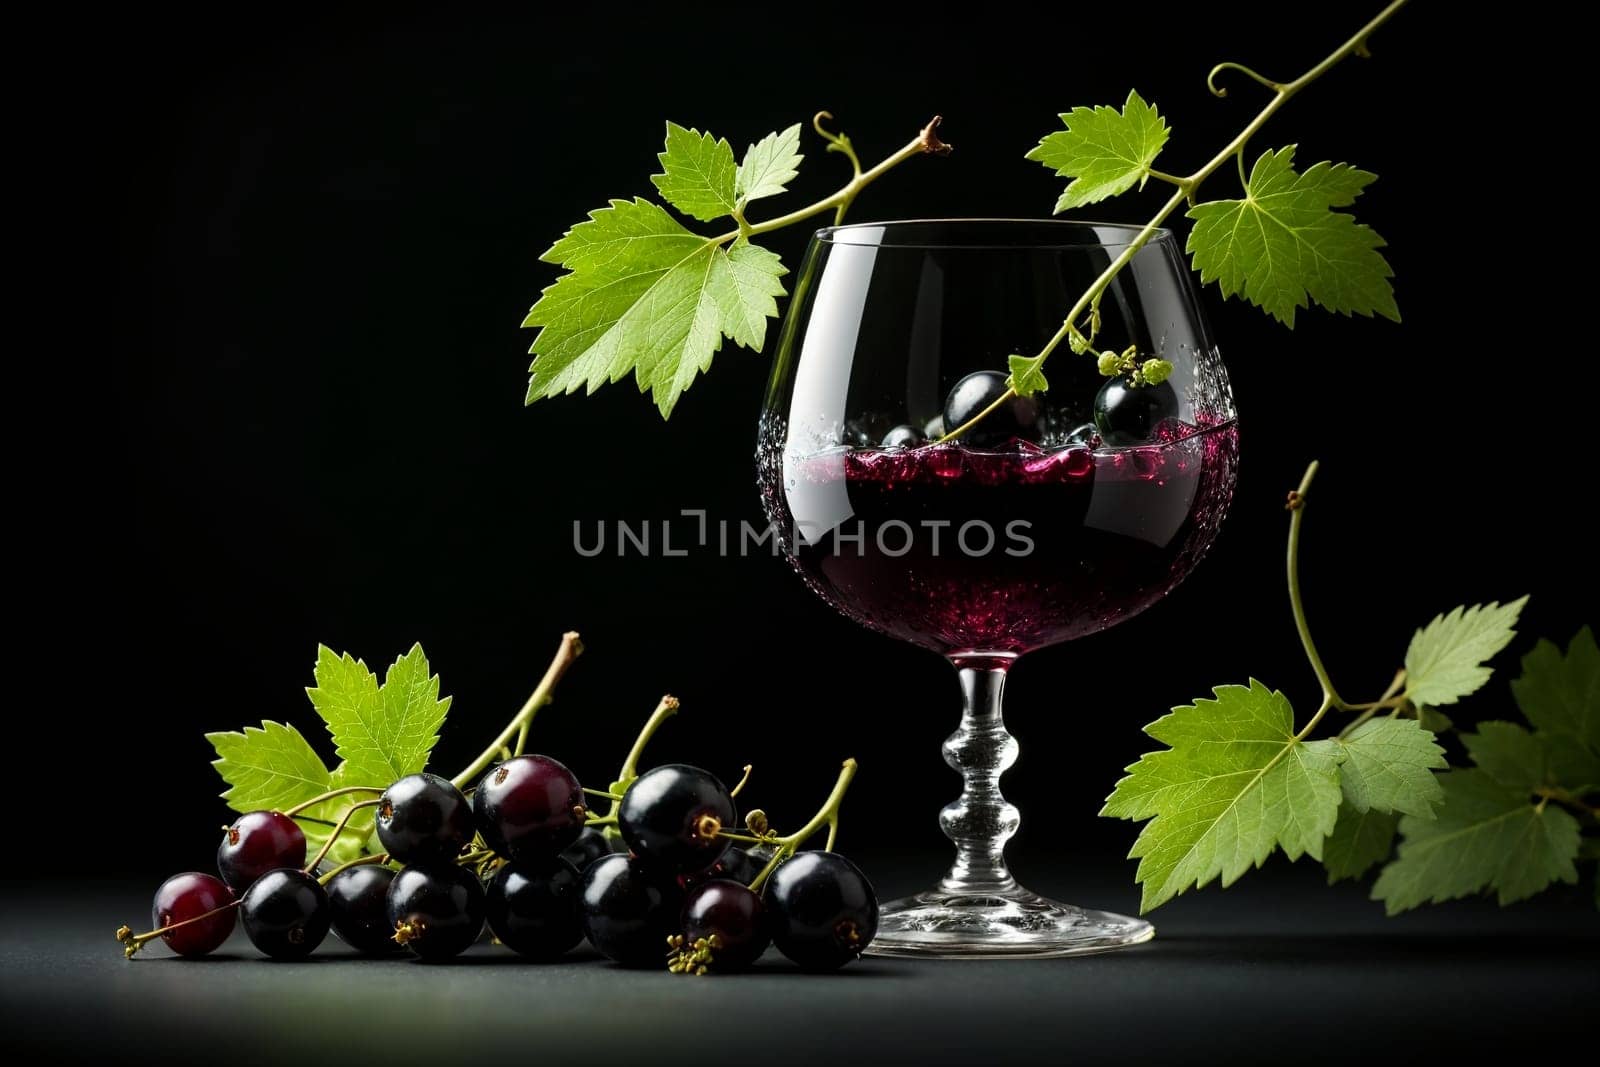 black currant liqueur, wine in a glass isolated on a green background .